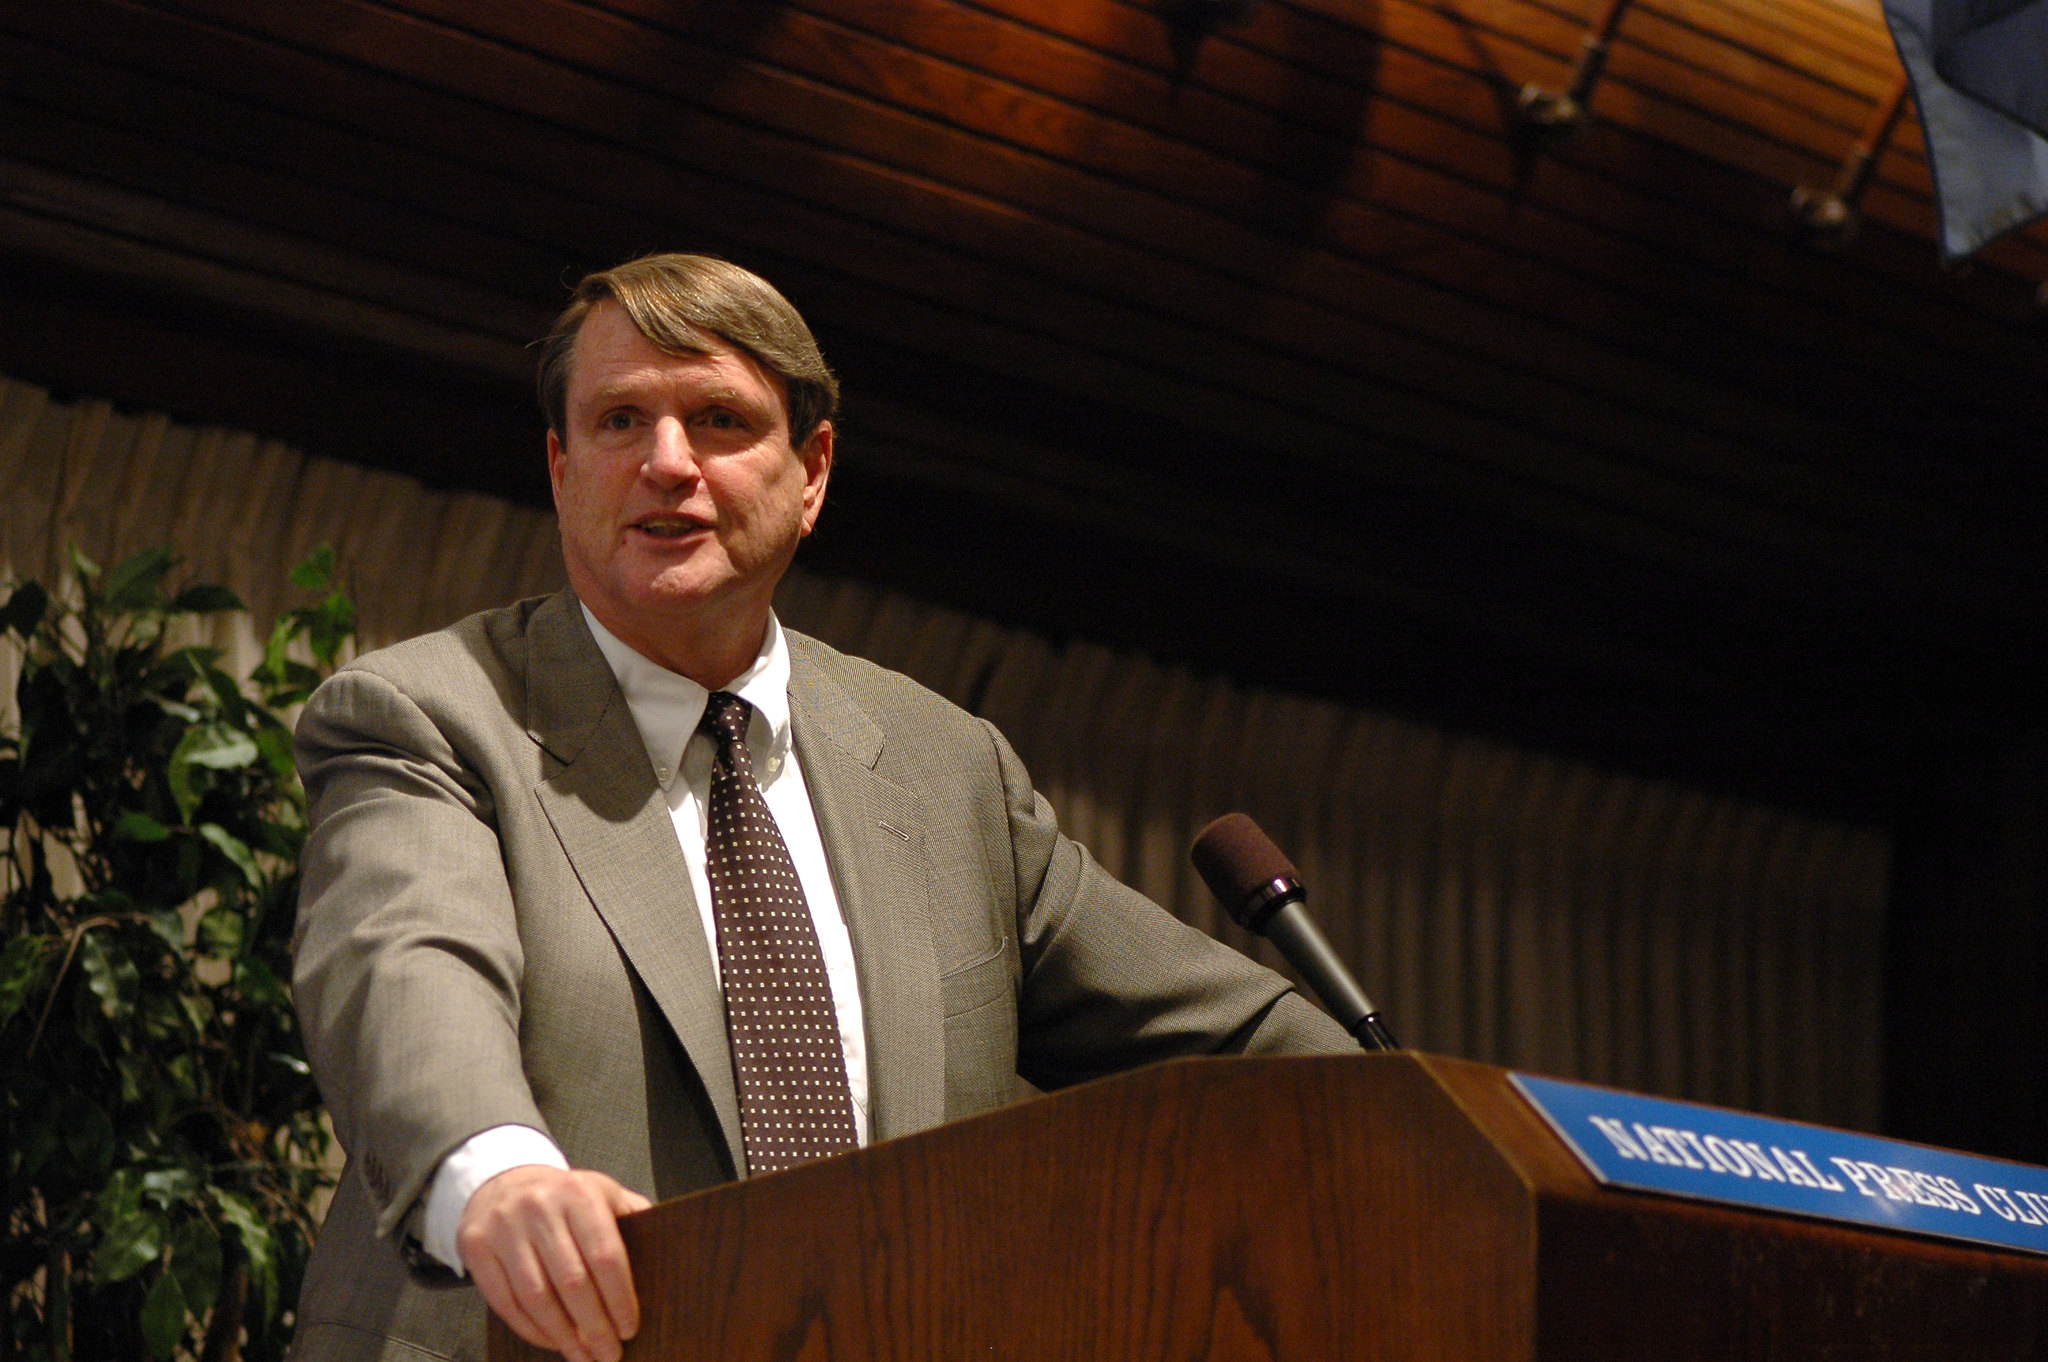 Leonard Downie speaking at the National Press Club in 2007. (Photo: Terissa Schor/Flickr Creative Commons)